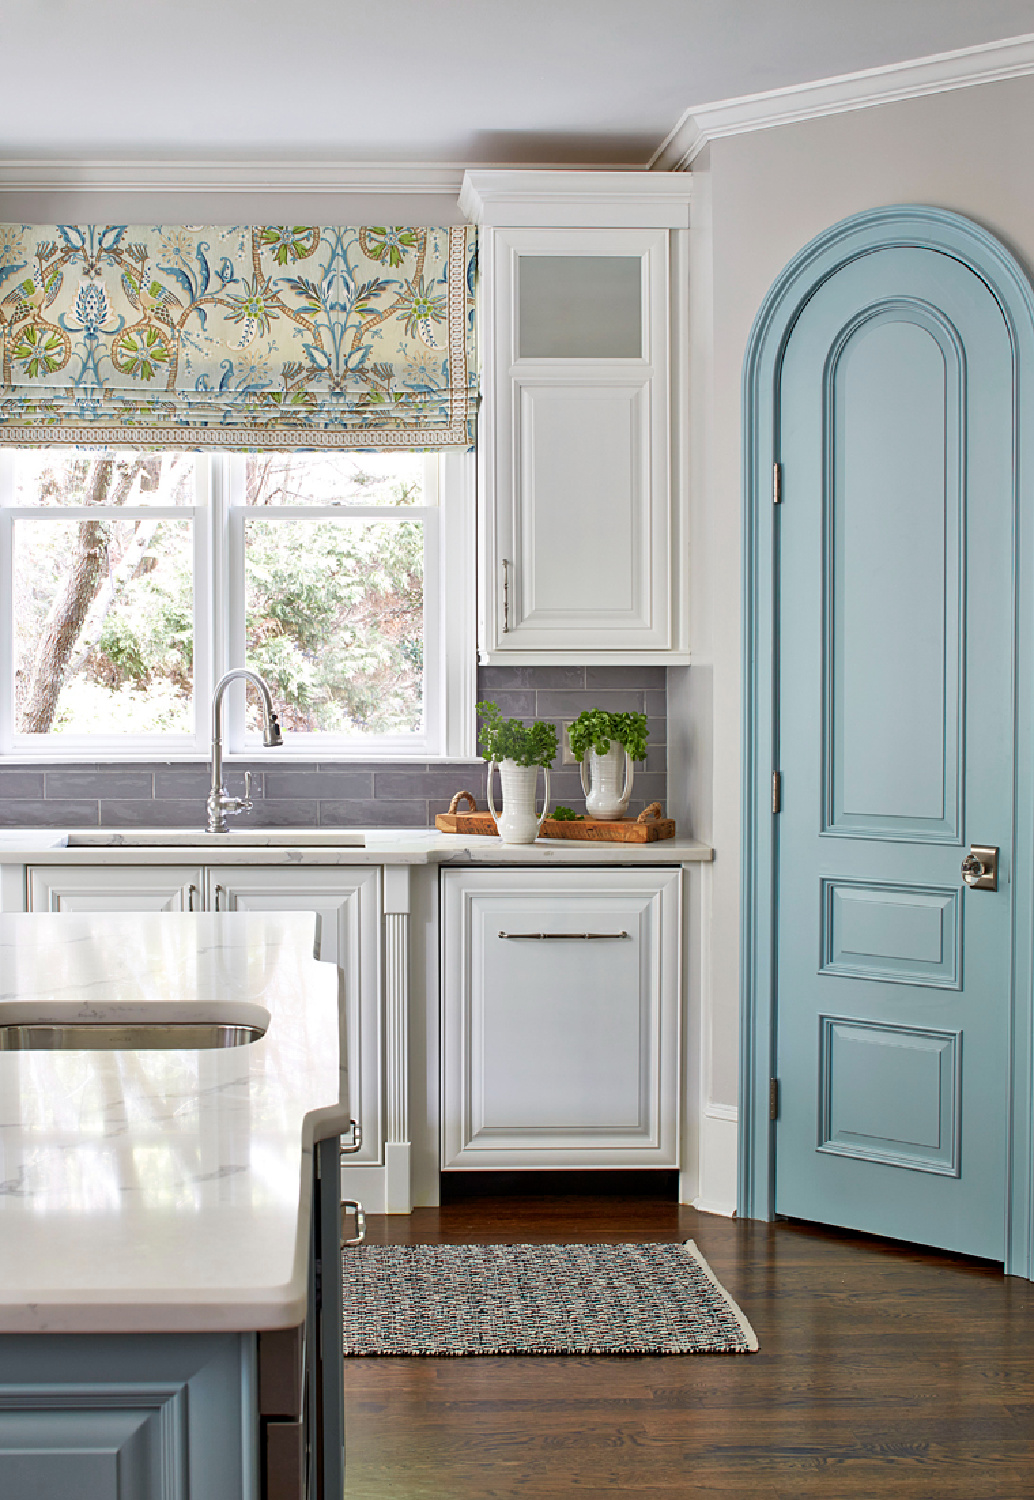 SW Atmospheric (turquoise blue) accents in a Kandrac & Kole designed kitchen with turquoise island and arched pantry door. Walls are SW Repose Gray. #bmatmospheric #reposegray #turquoisekitchen